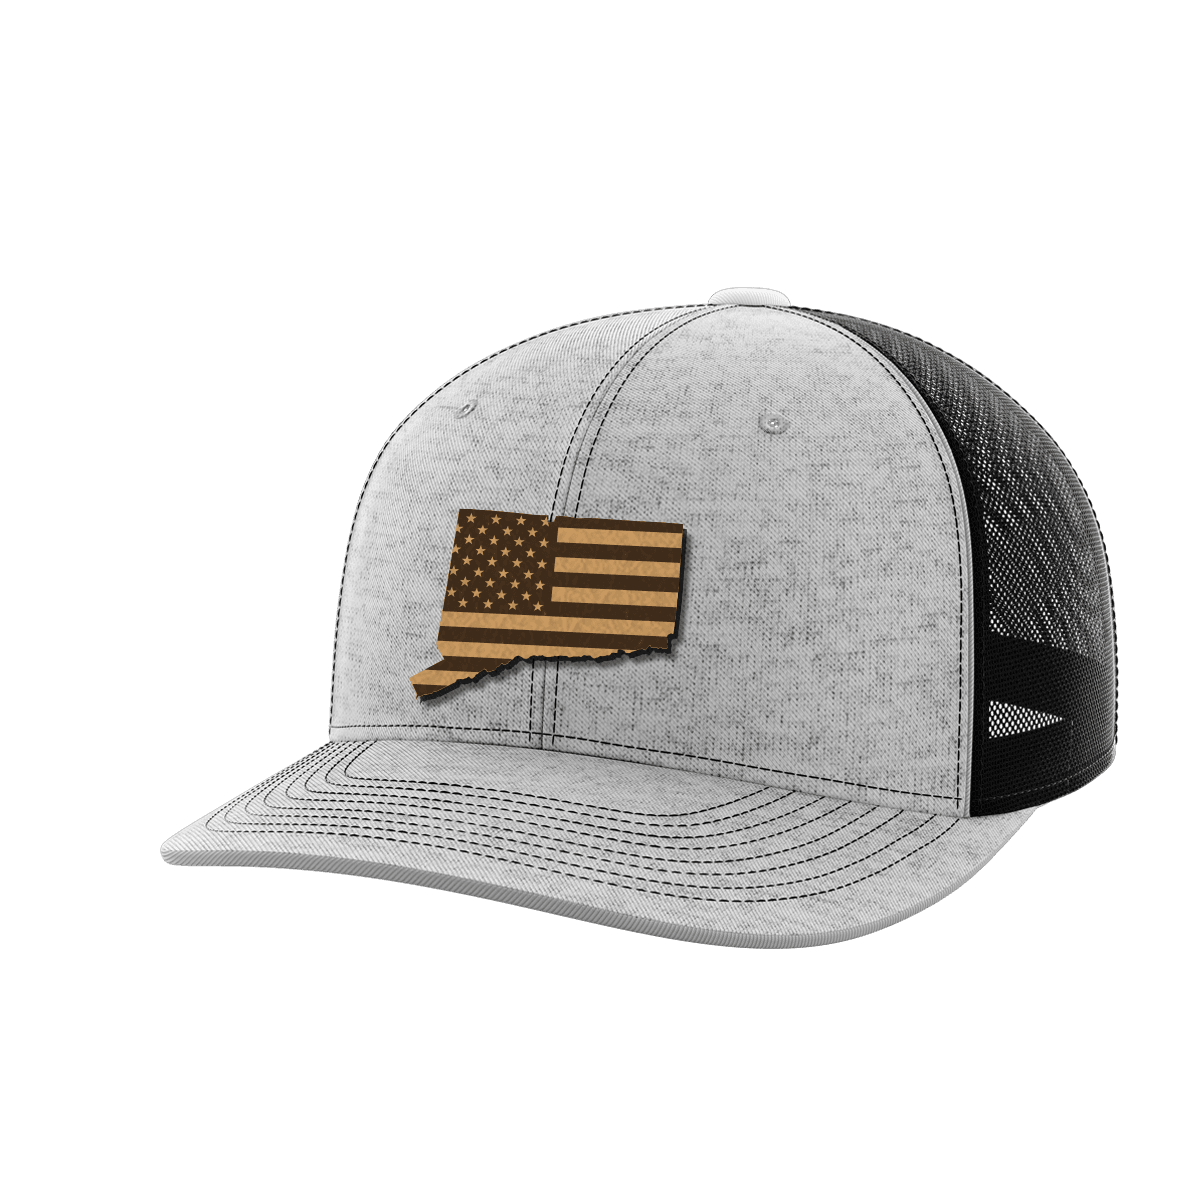 Connecticut United Hats - Greater Half